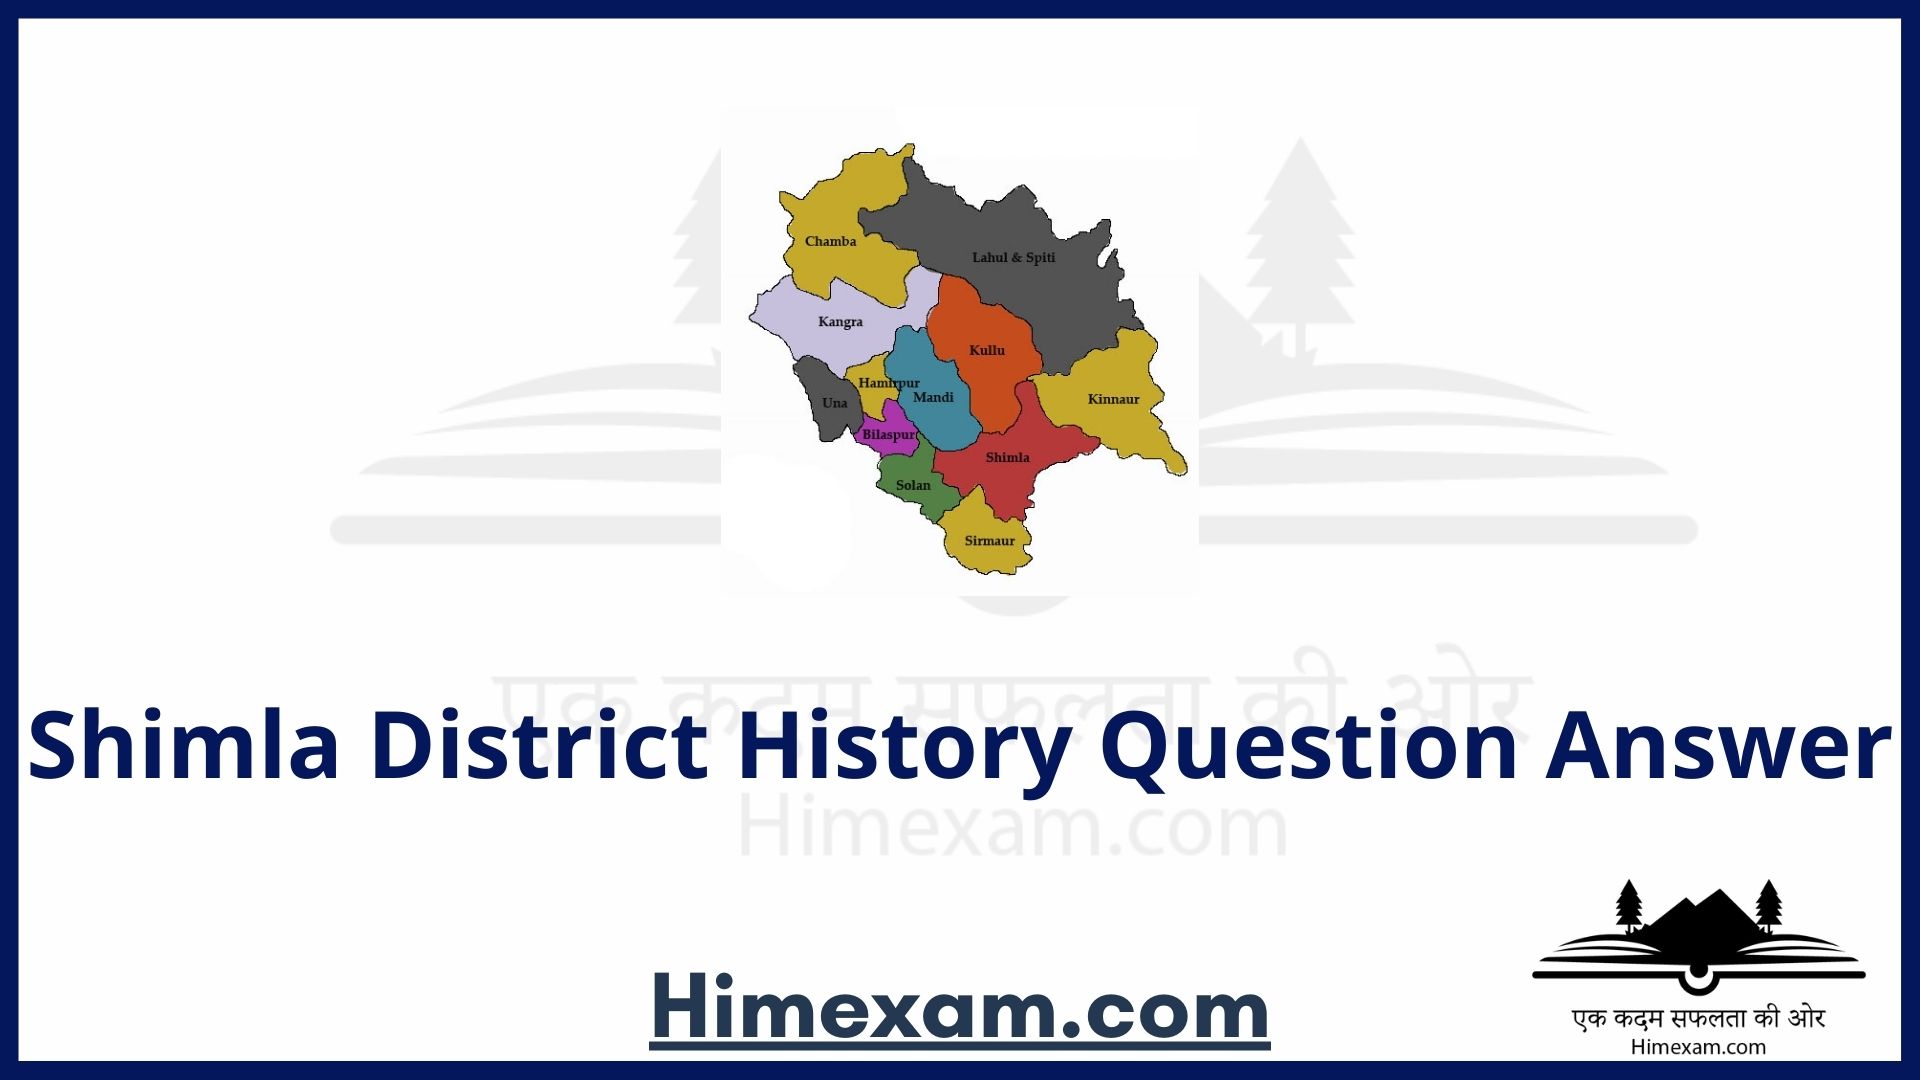 Shimla District History Question Answer